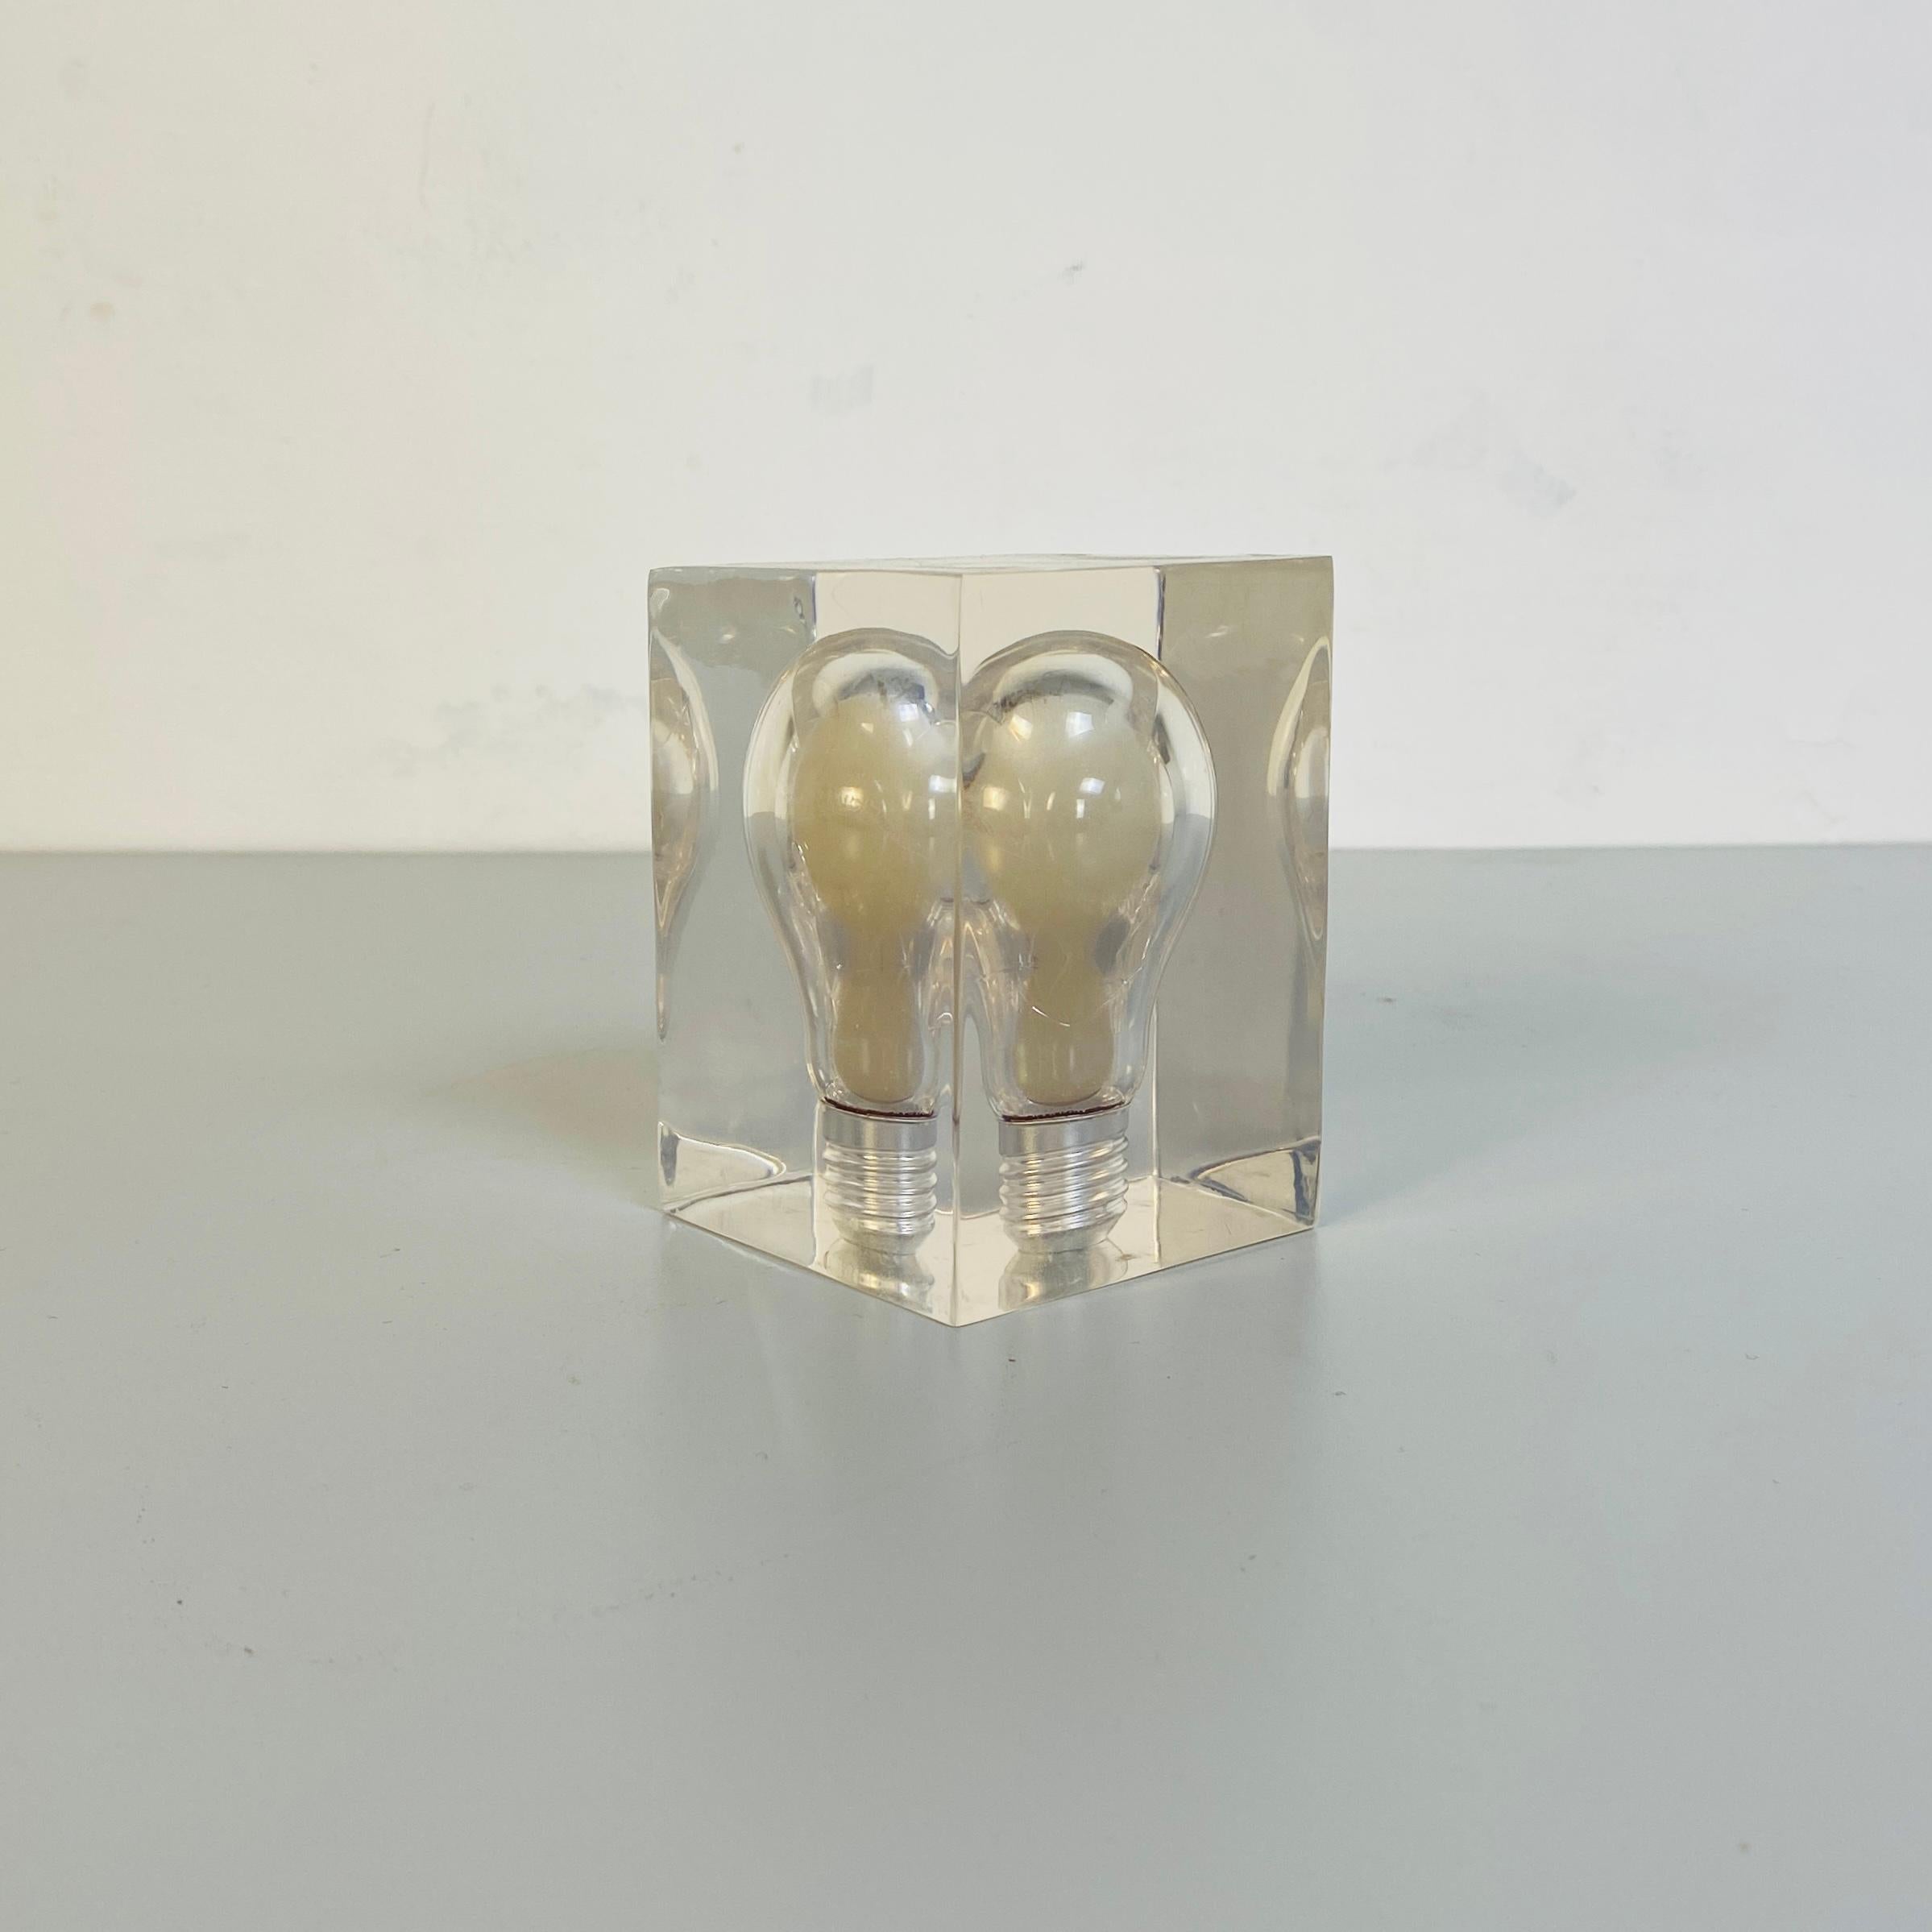 French Mid-Century Modern Lucite Sculpture by Pierre Giraudon, 1970s For Sale 2